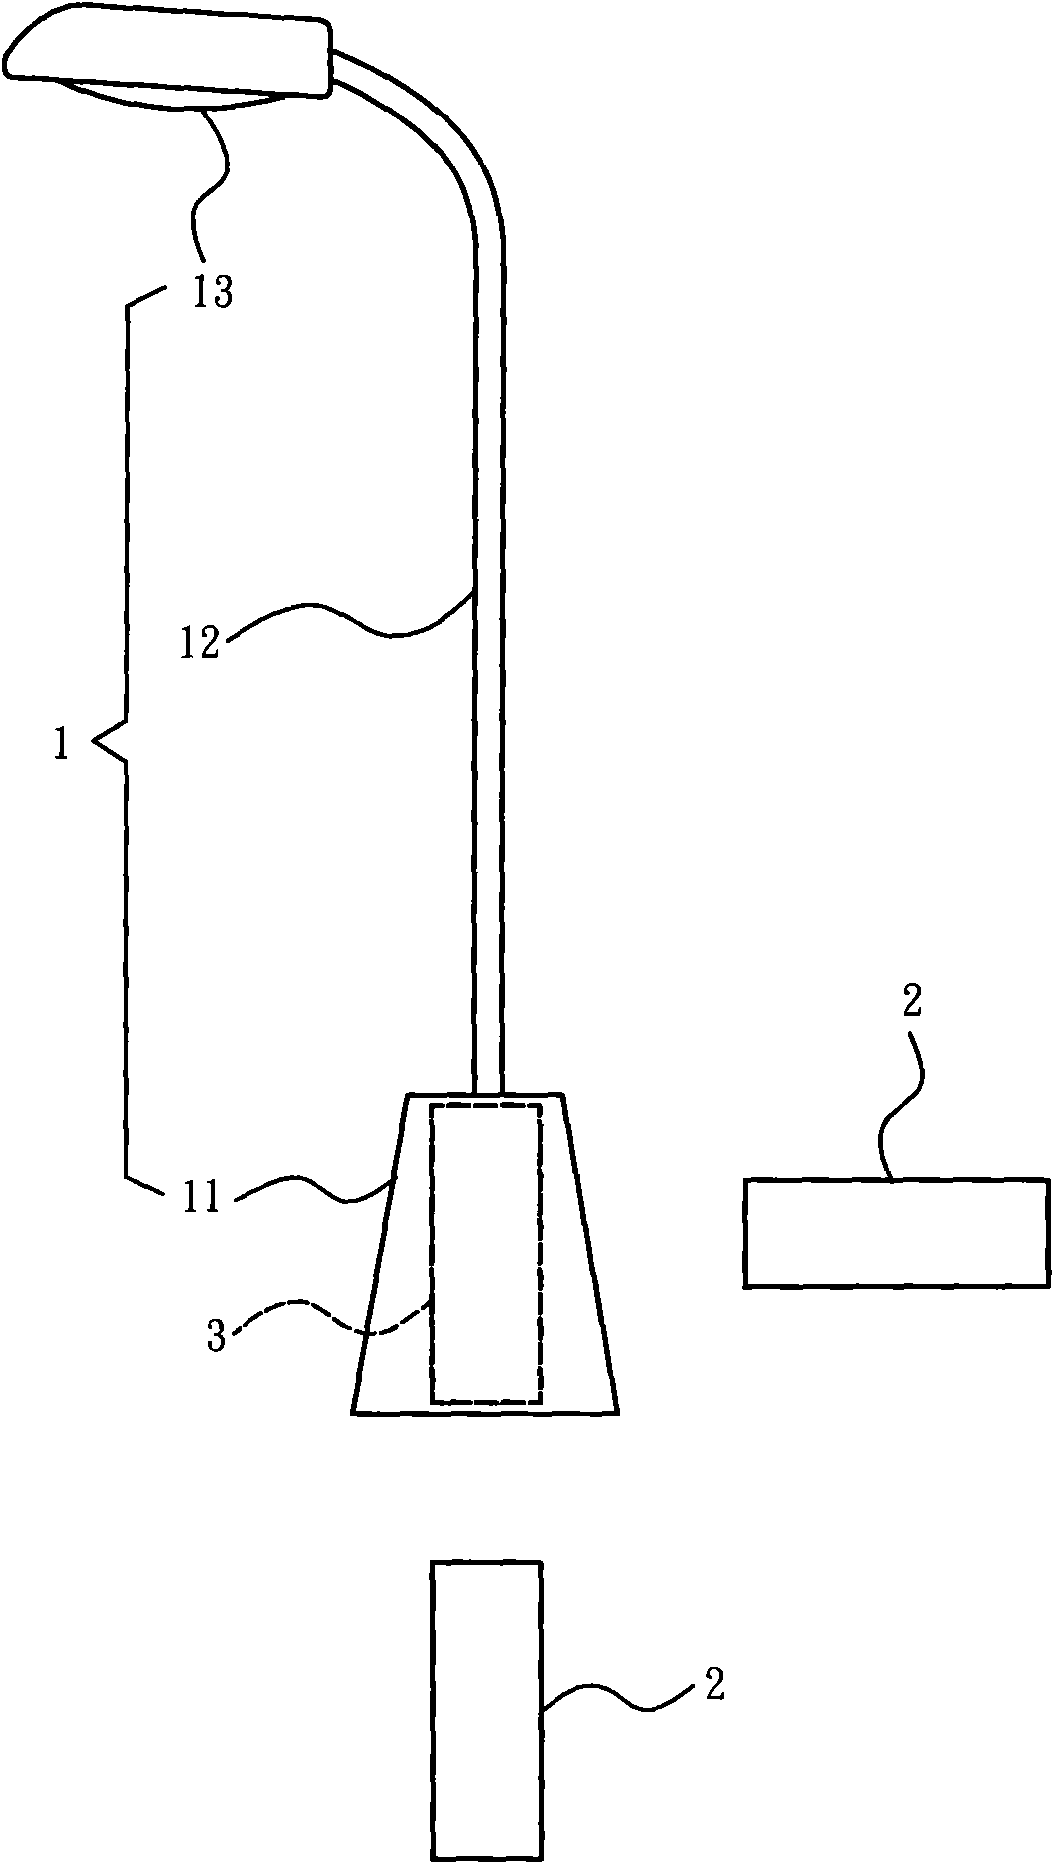 Street lamp device with power generating function